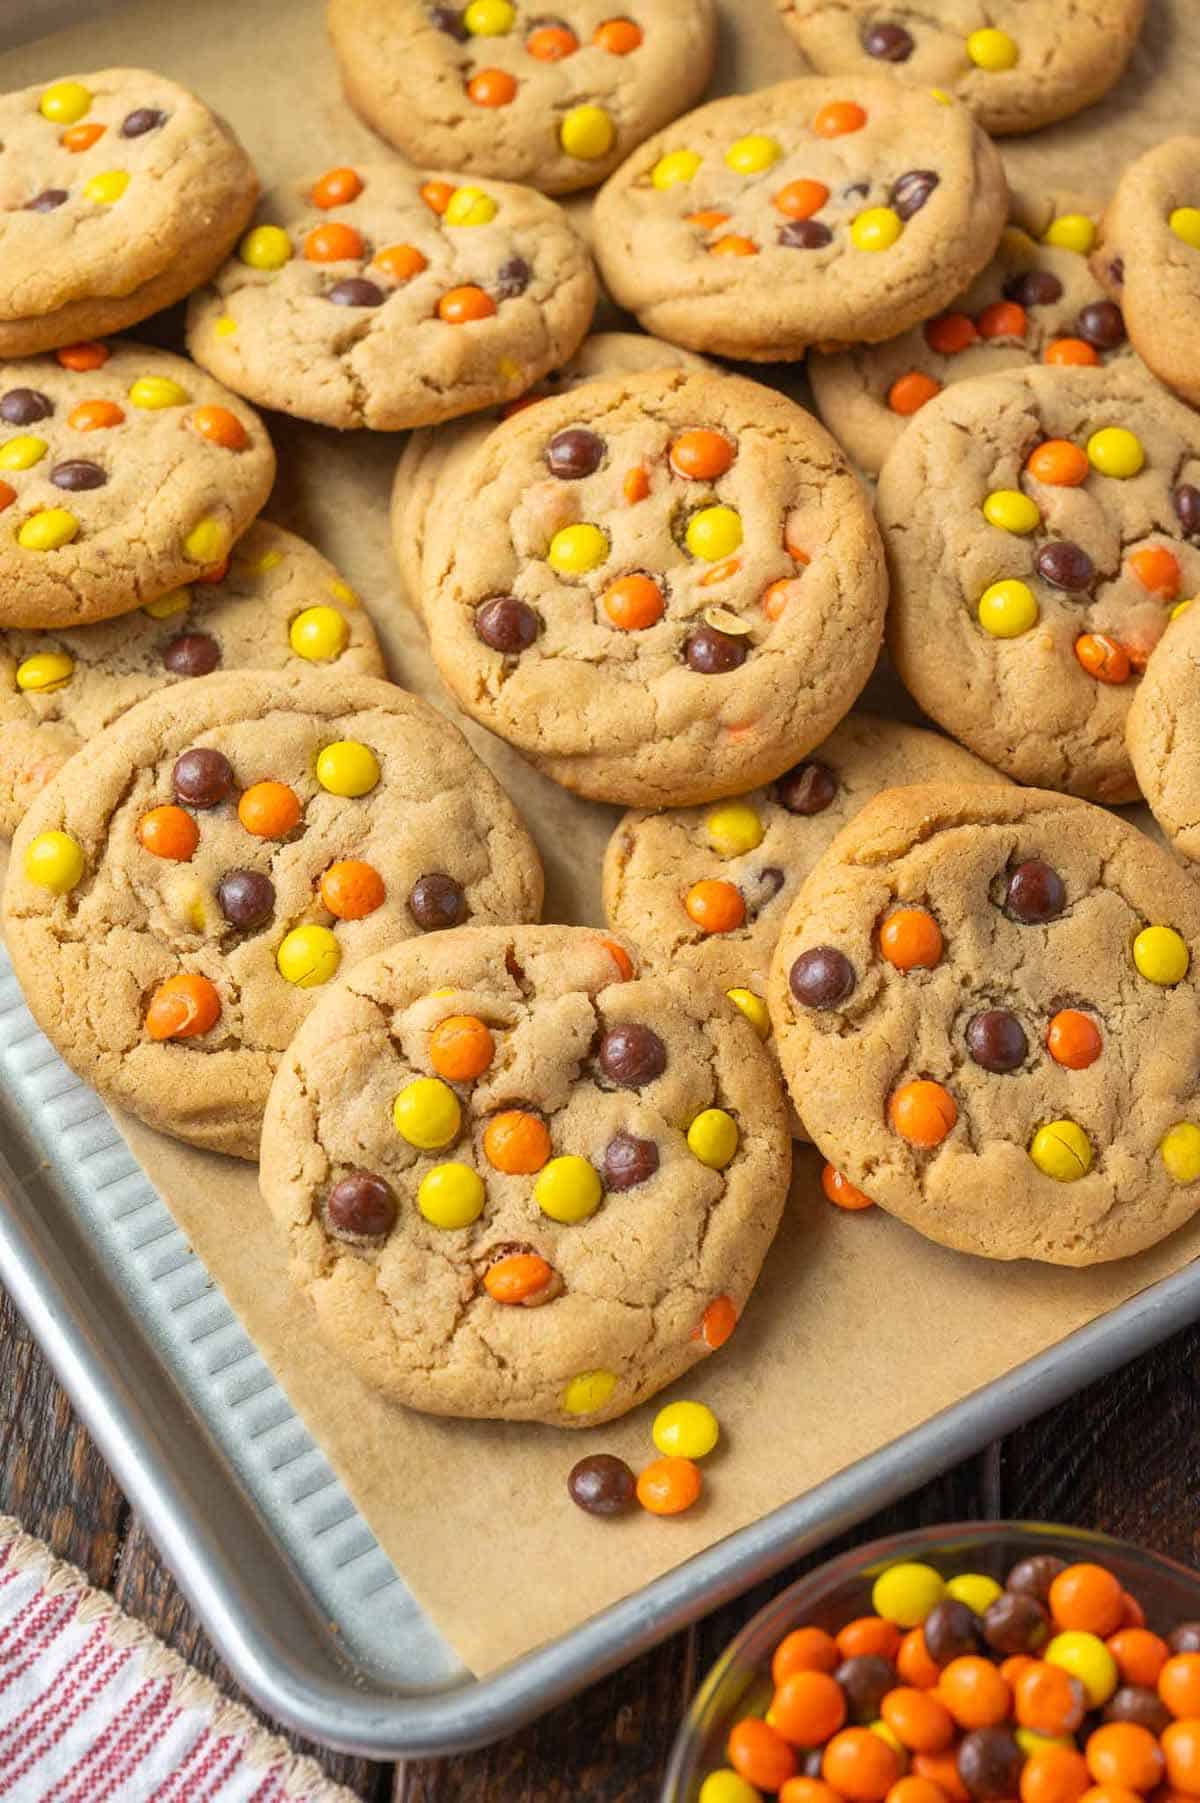 A pile of baked Reese's pieces peanut butter cookies on a baking sheet.